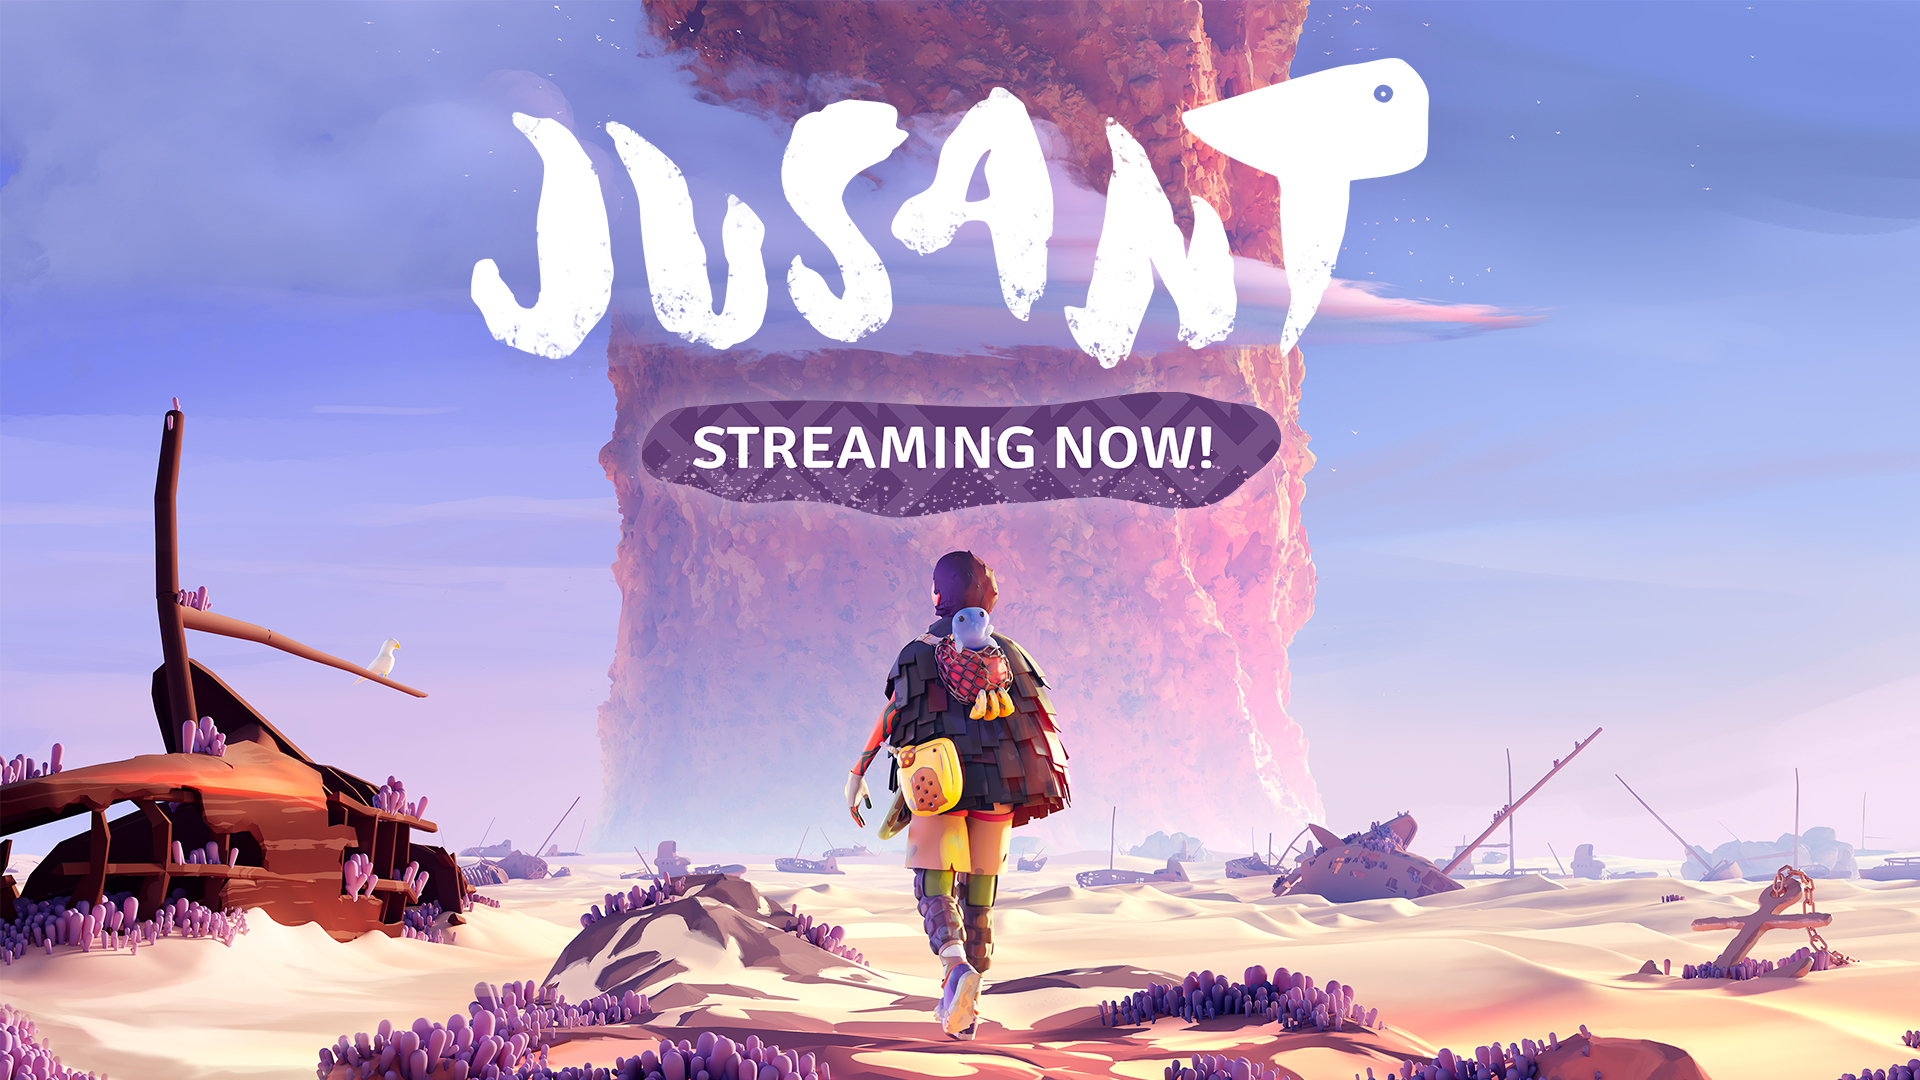 Watch the Jusant devs play the demo!